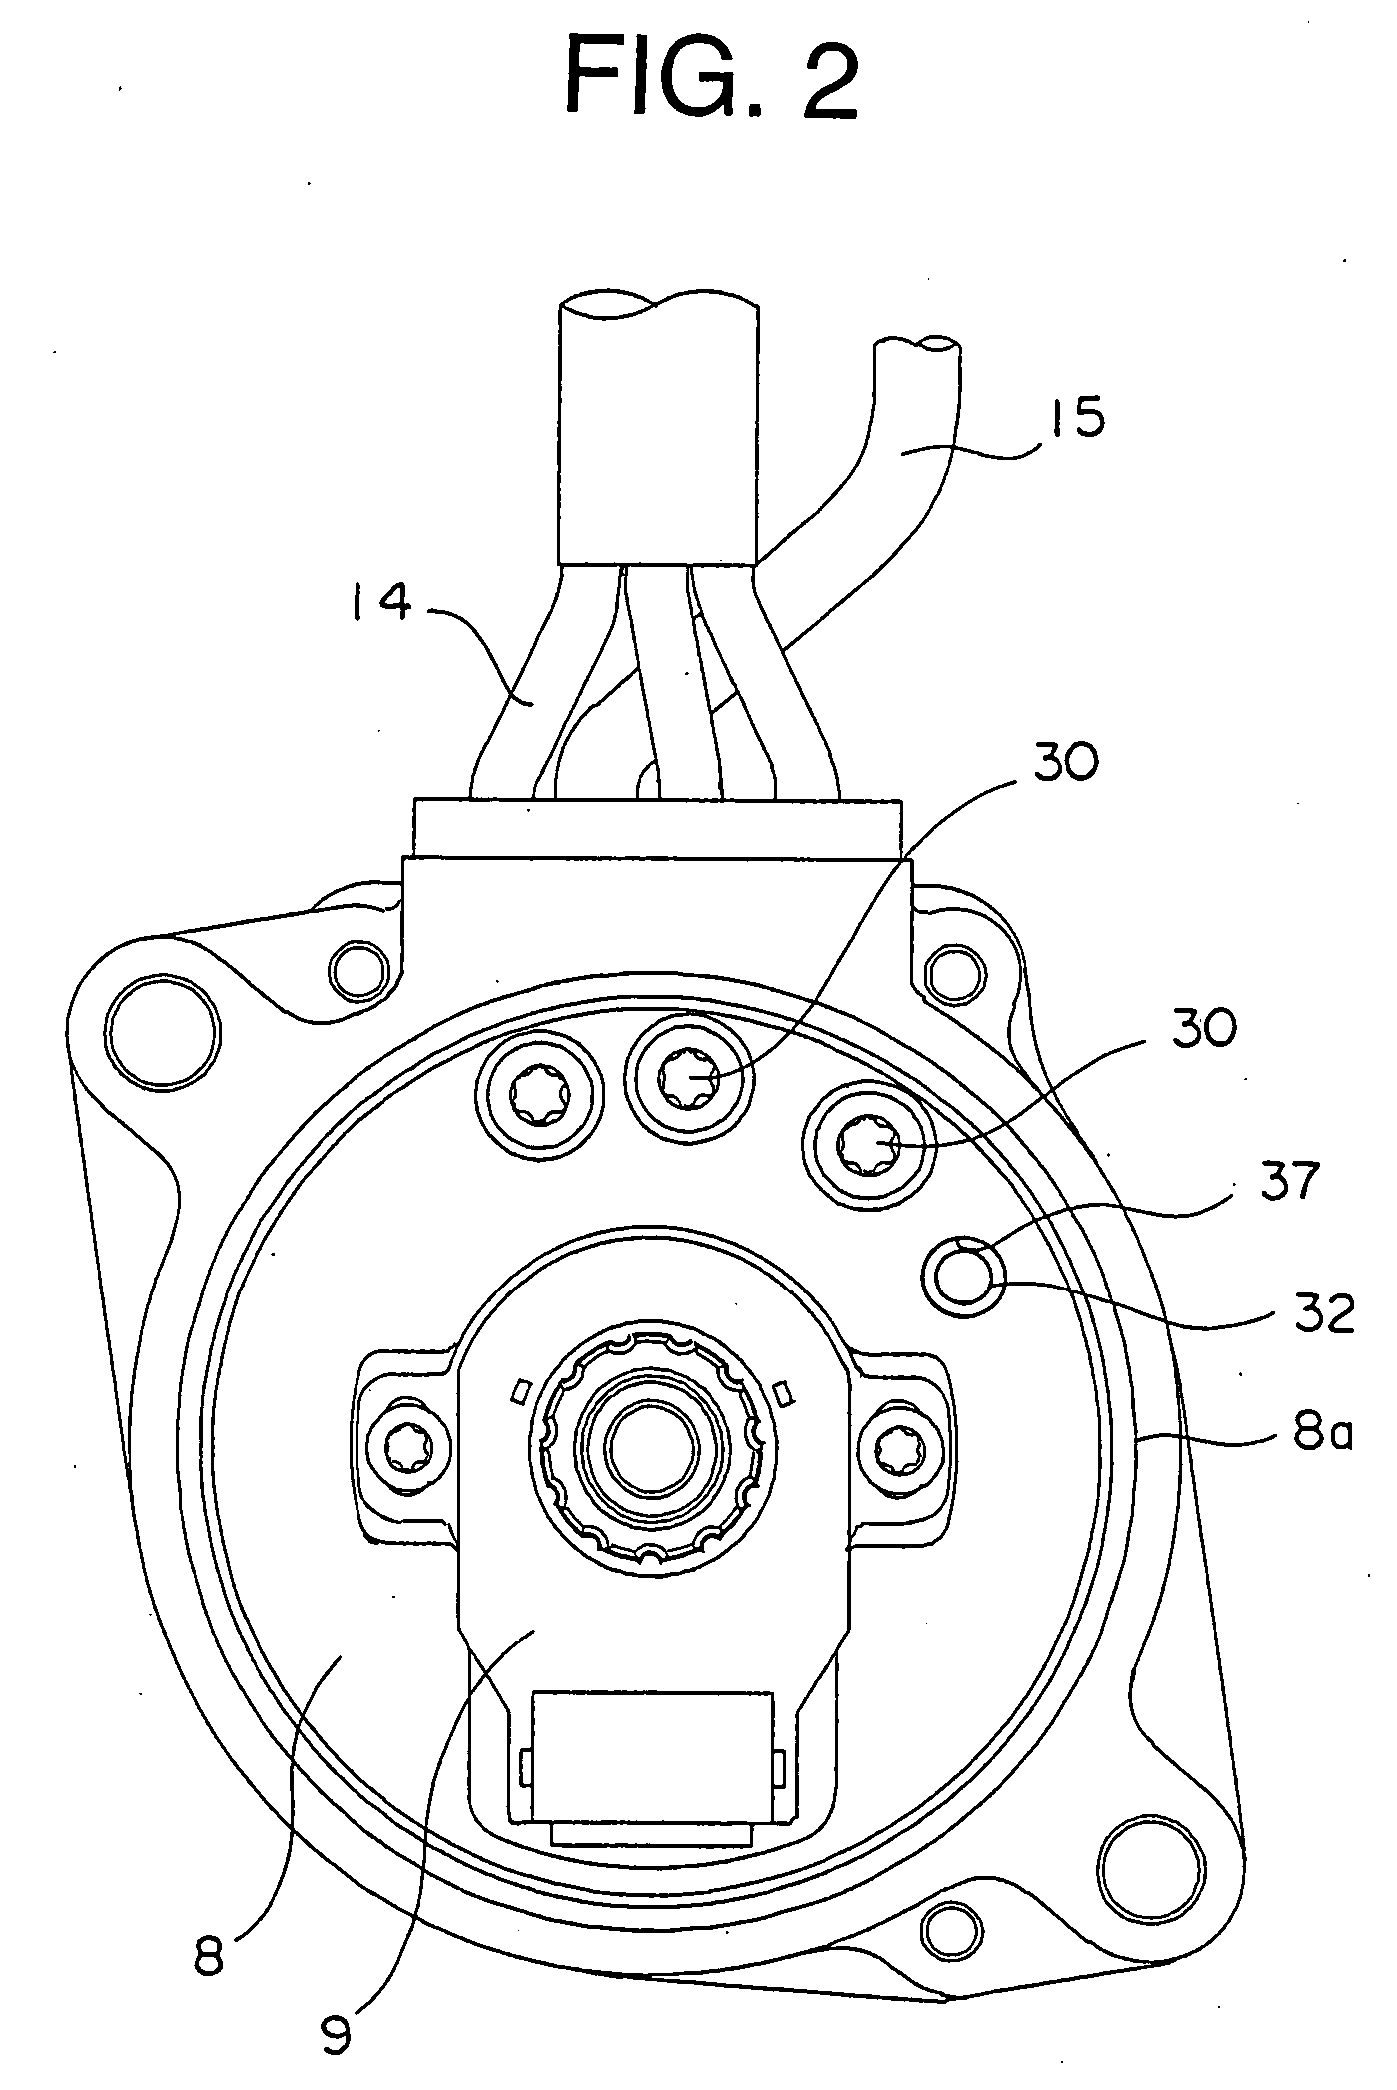 Motor for electric power steering apparatus